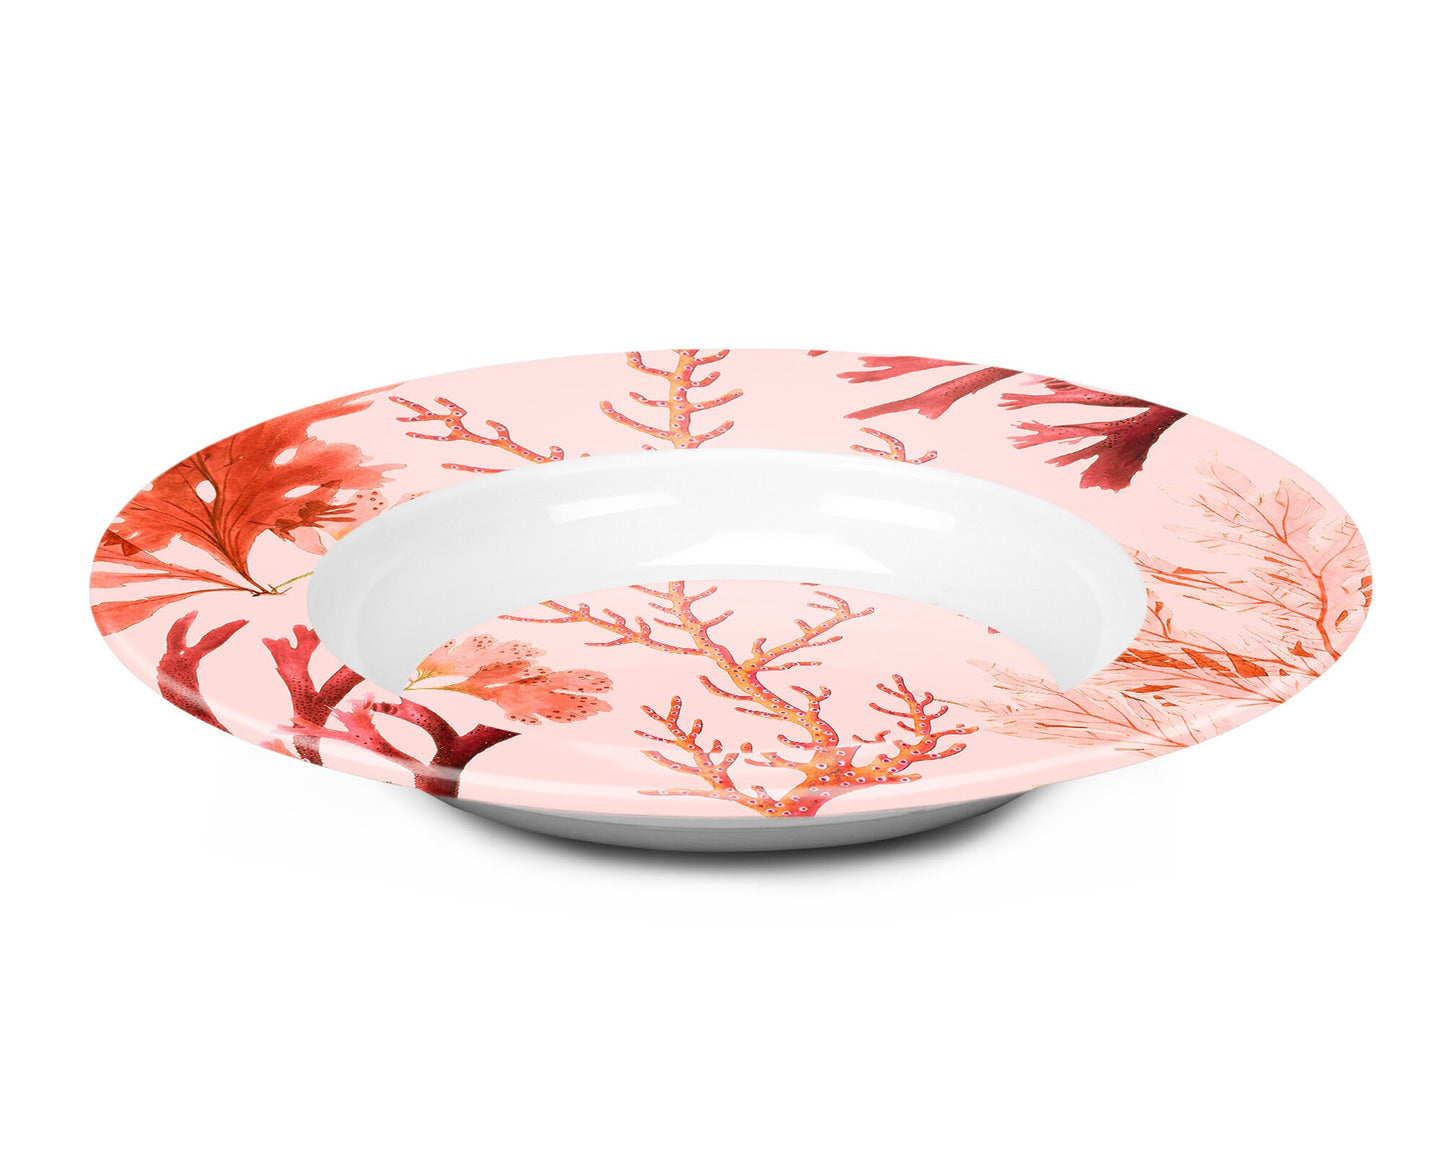 Coral Reef Bowls, Set of 4, Pale Pink, Luxury Thermosaf Plastic